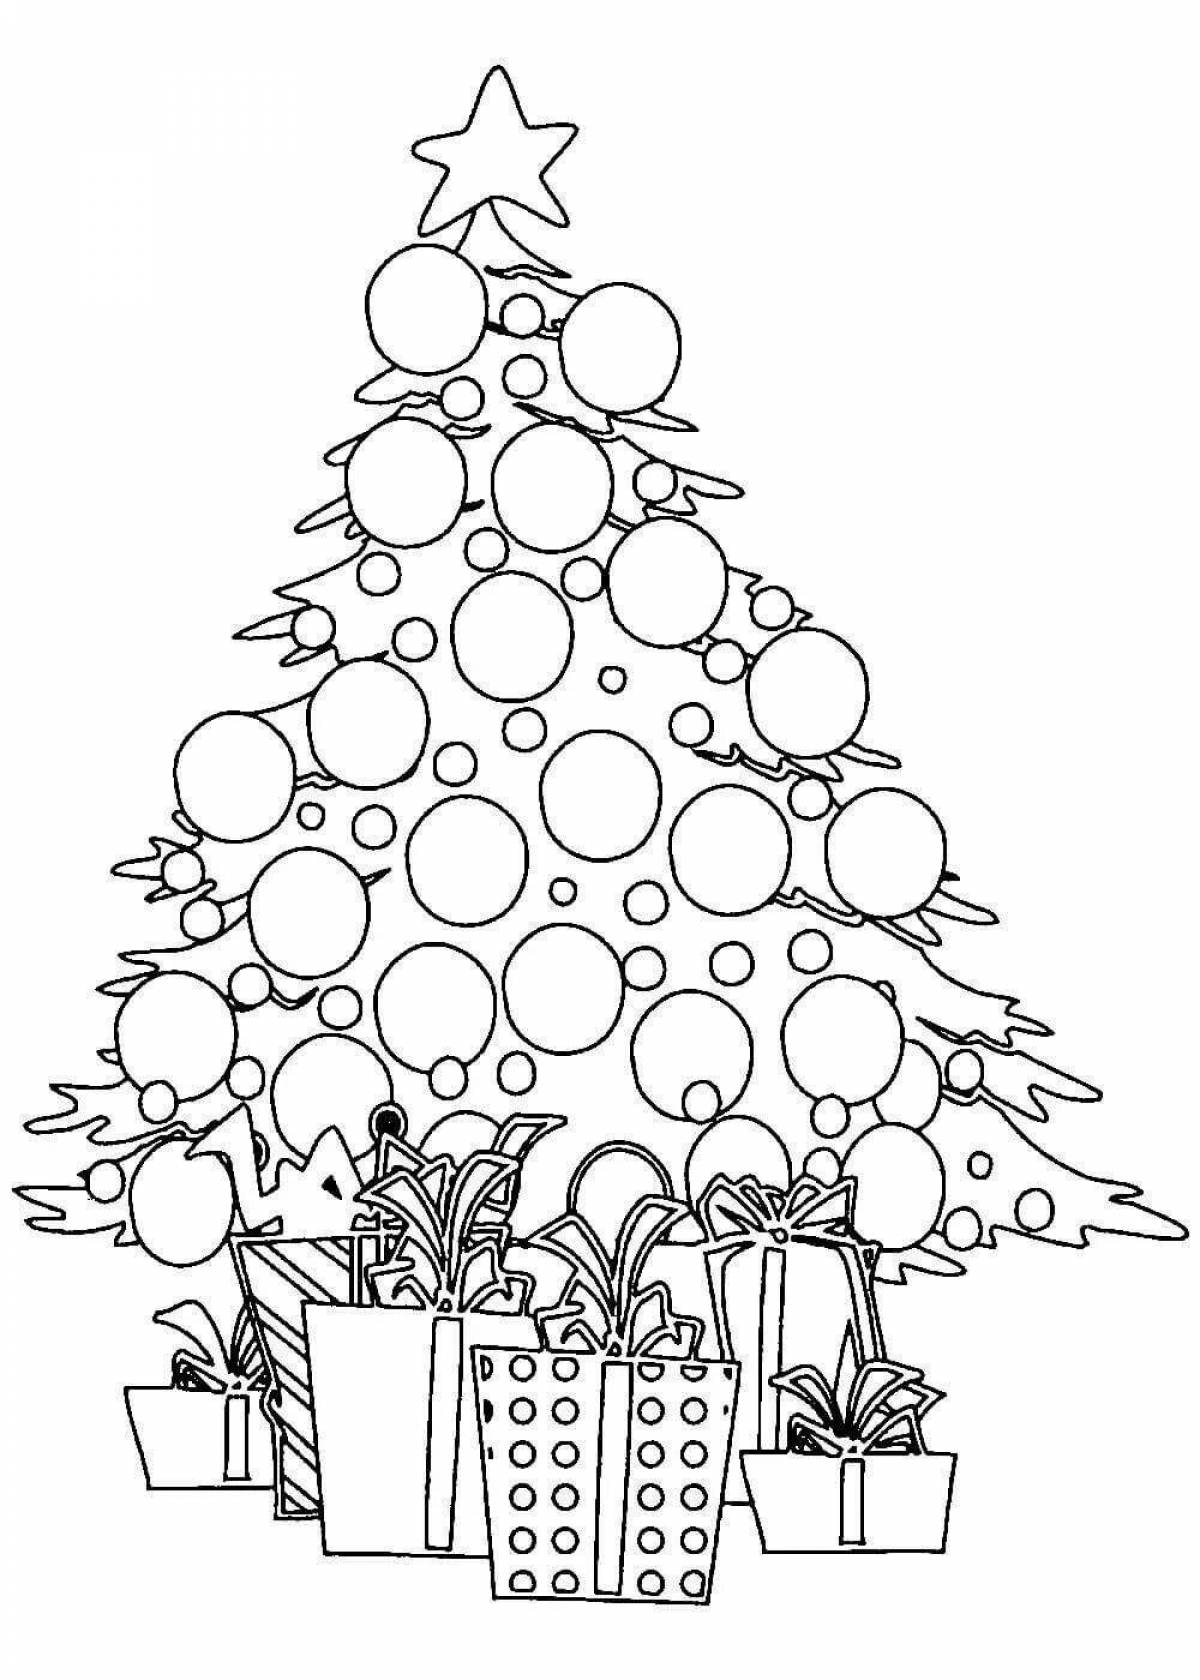 Fat Christmas tree coloring card